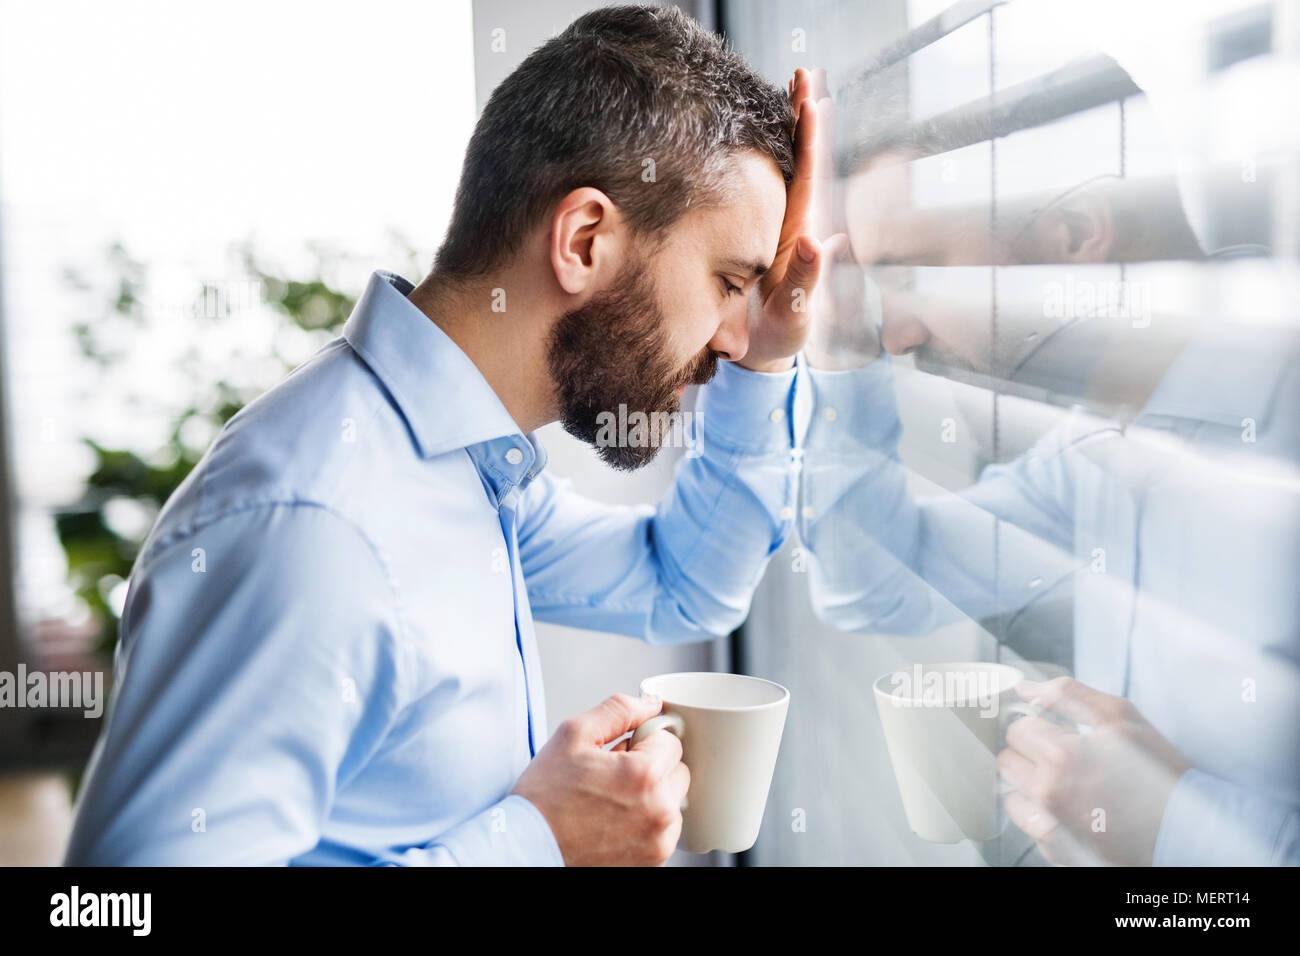 An unhappy man by the window holding a cup of coffee. Stock Photo